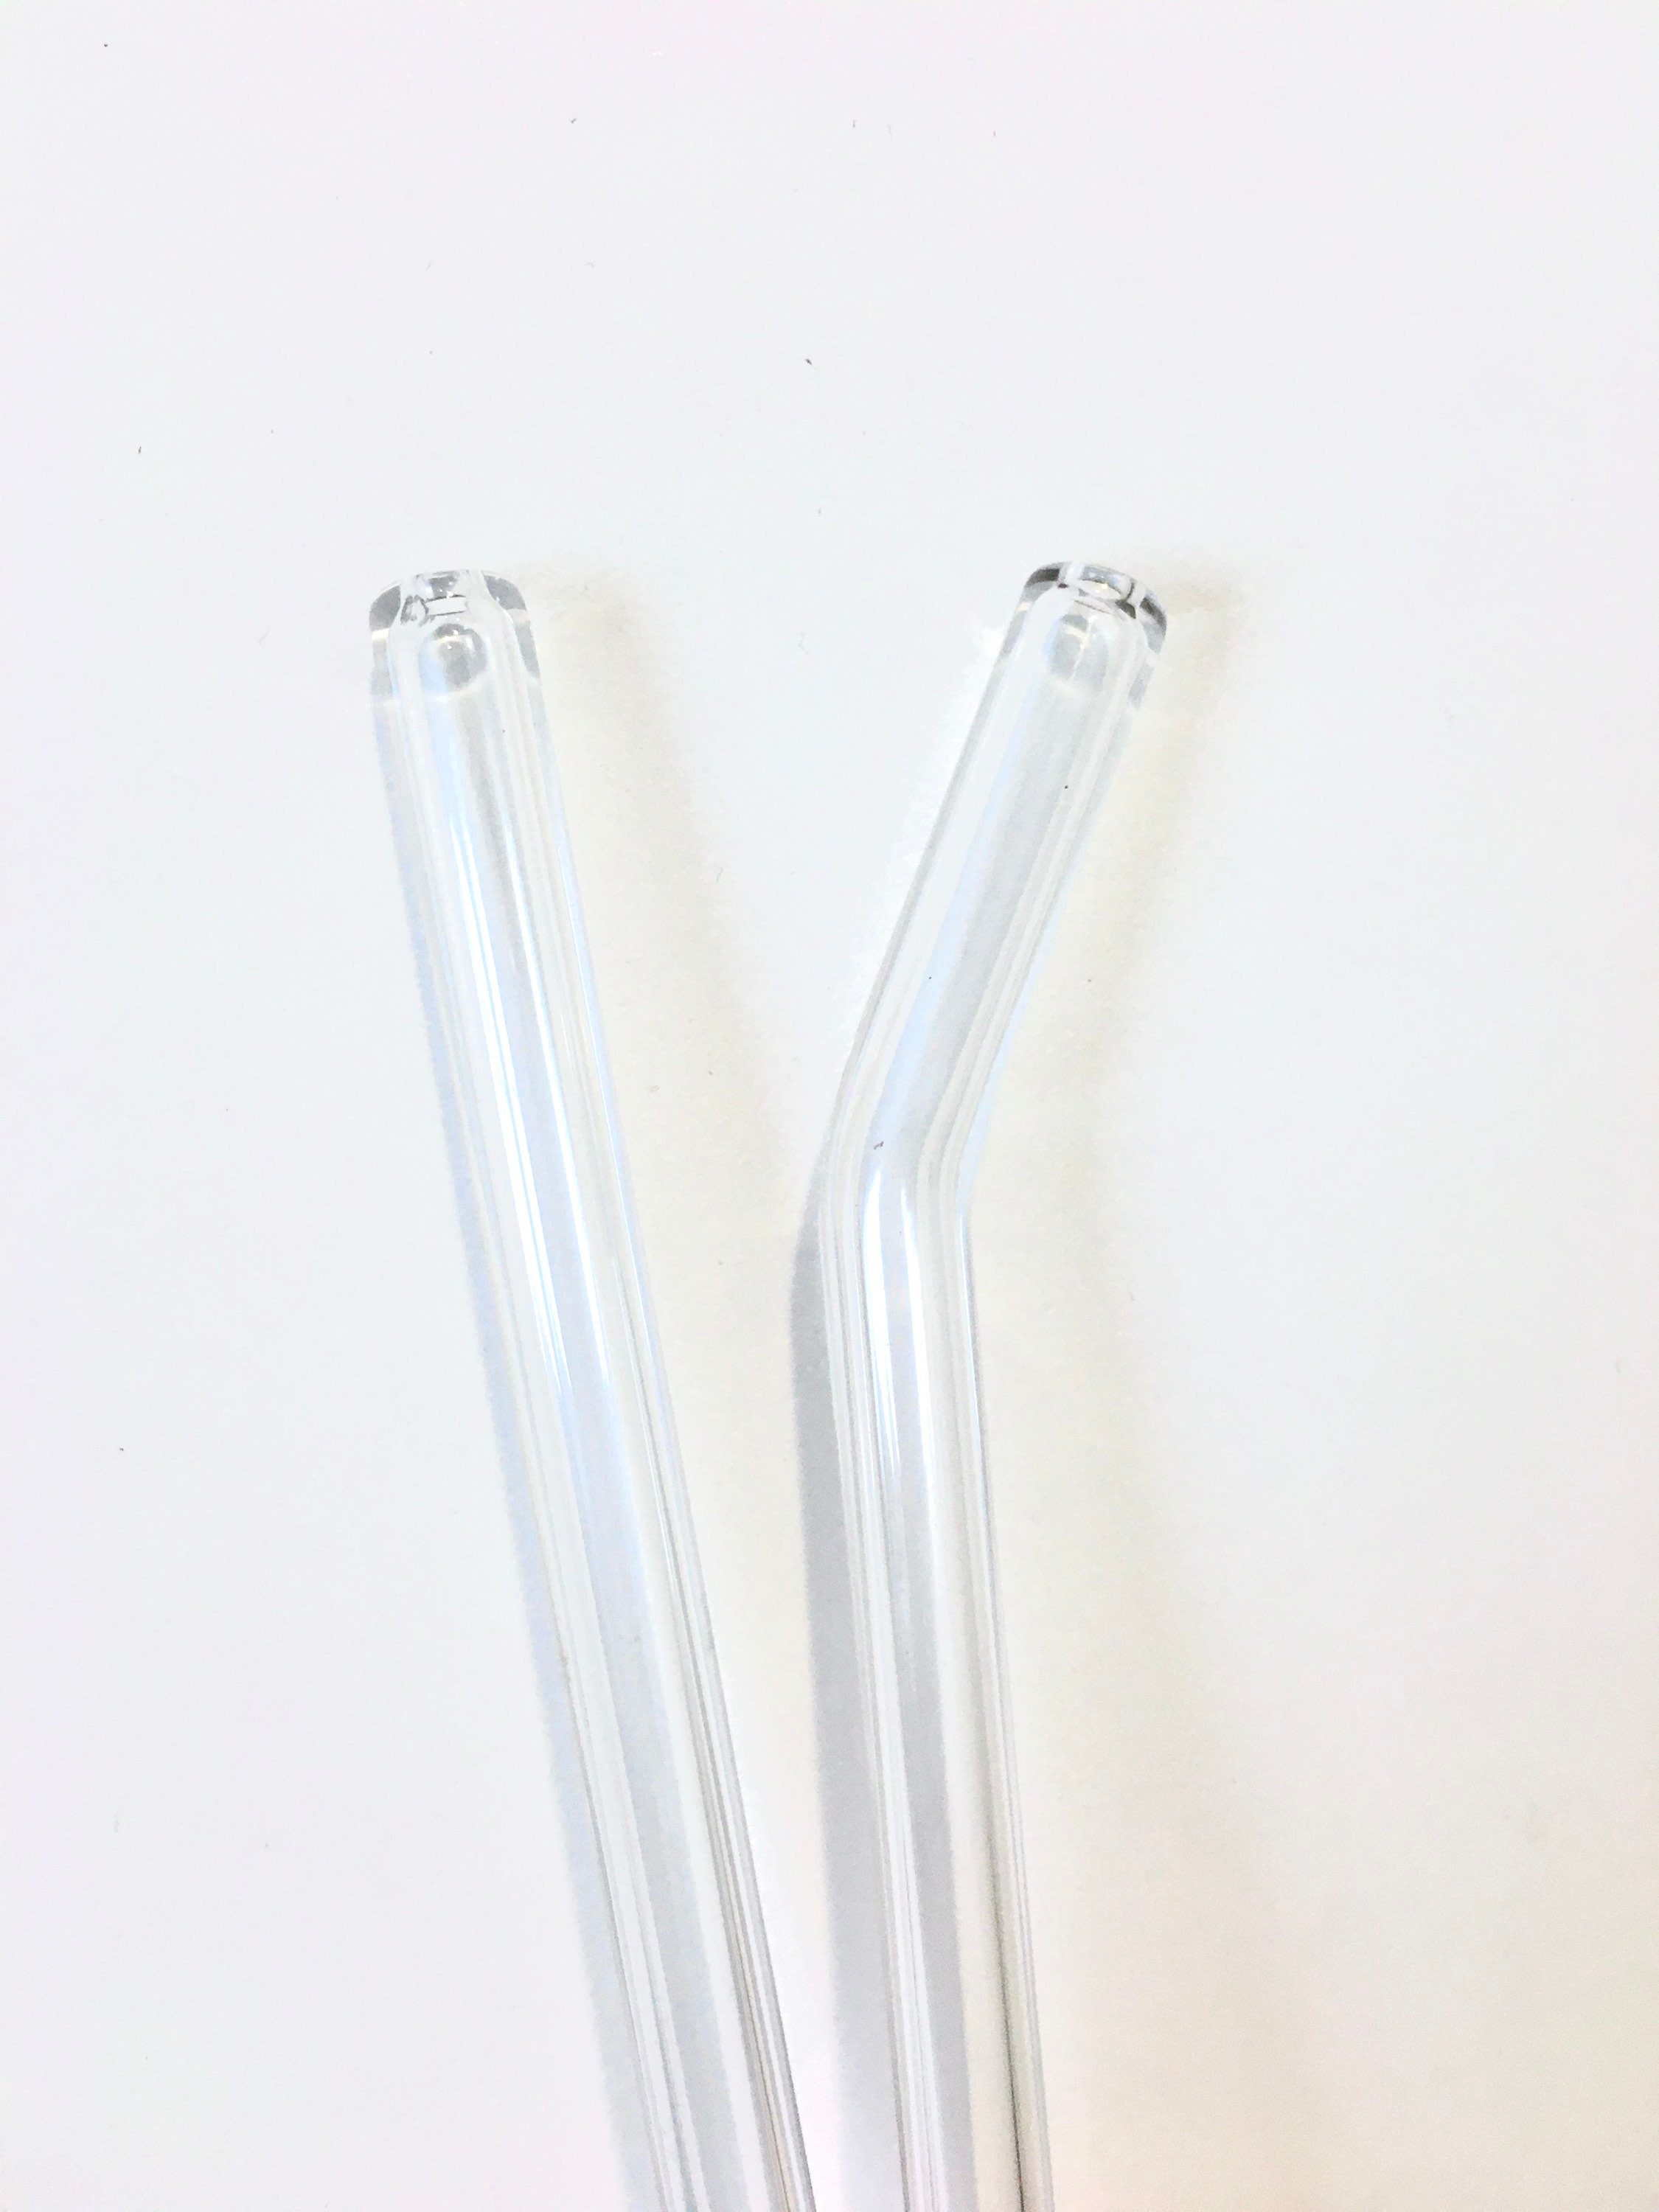 Wholesale Clear GLASS STRAWS Wholesale Straws Reusable Straws Party Favors  Clear Straws Wedding Favors Wholesale Glass Straws 